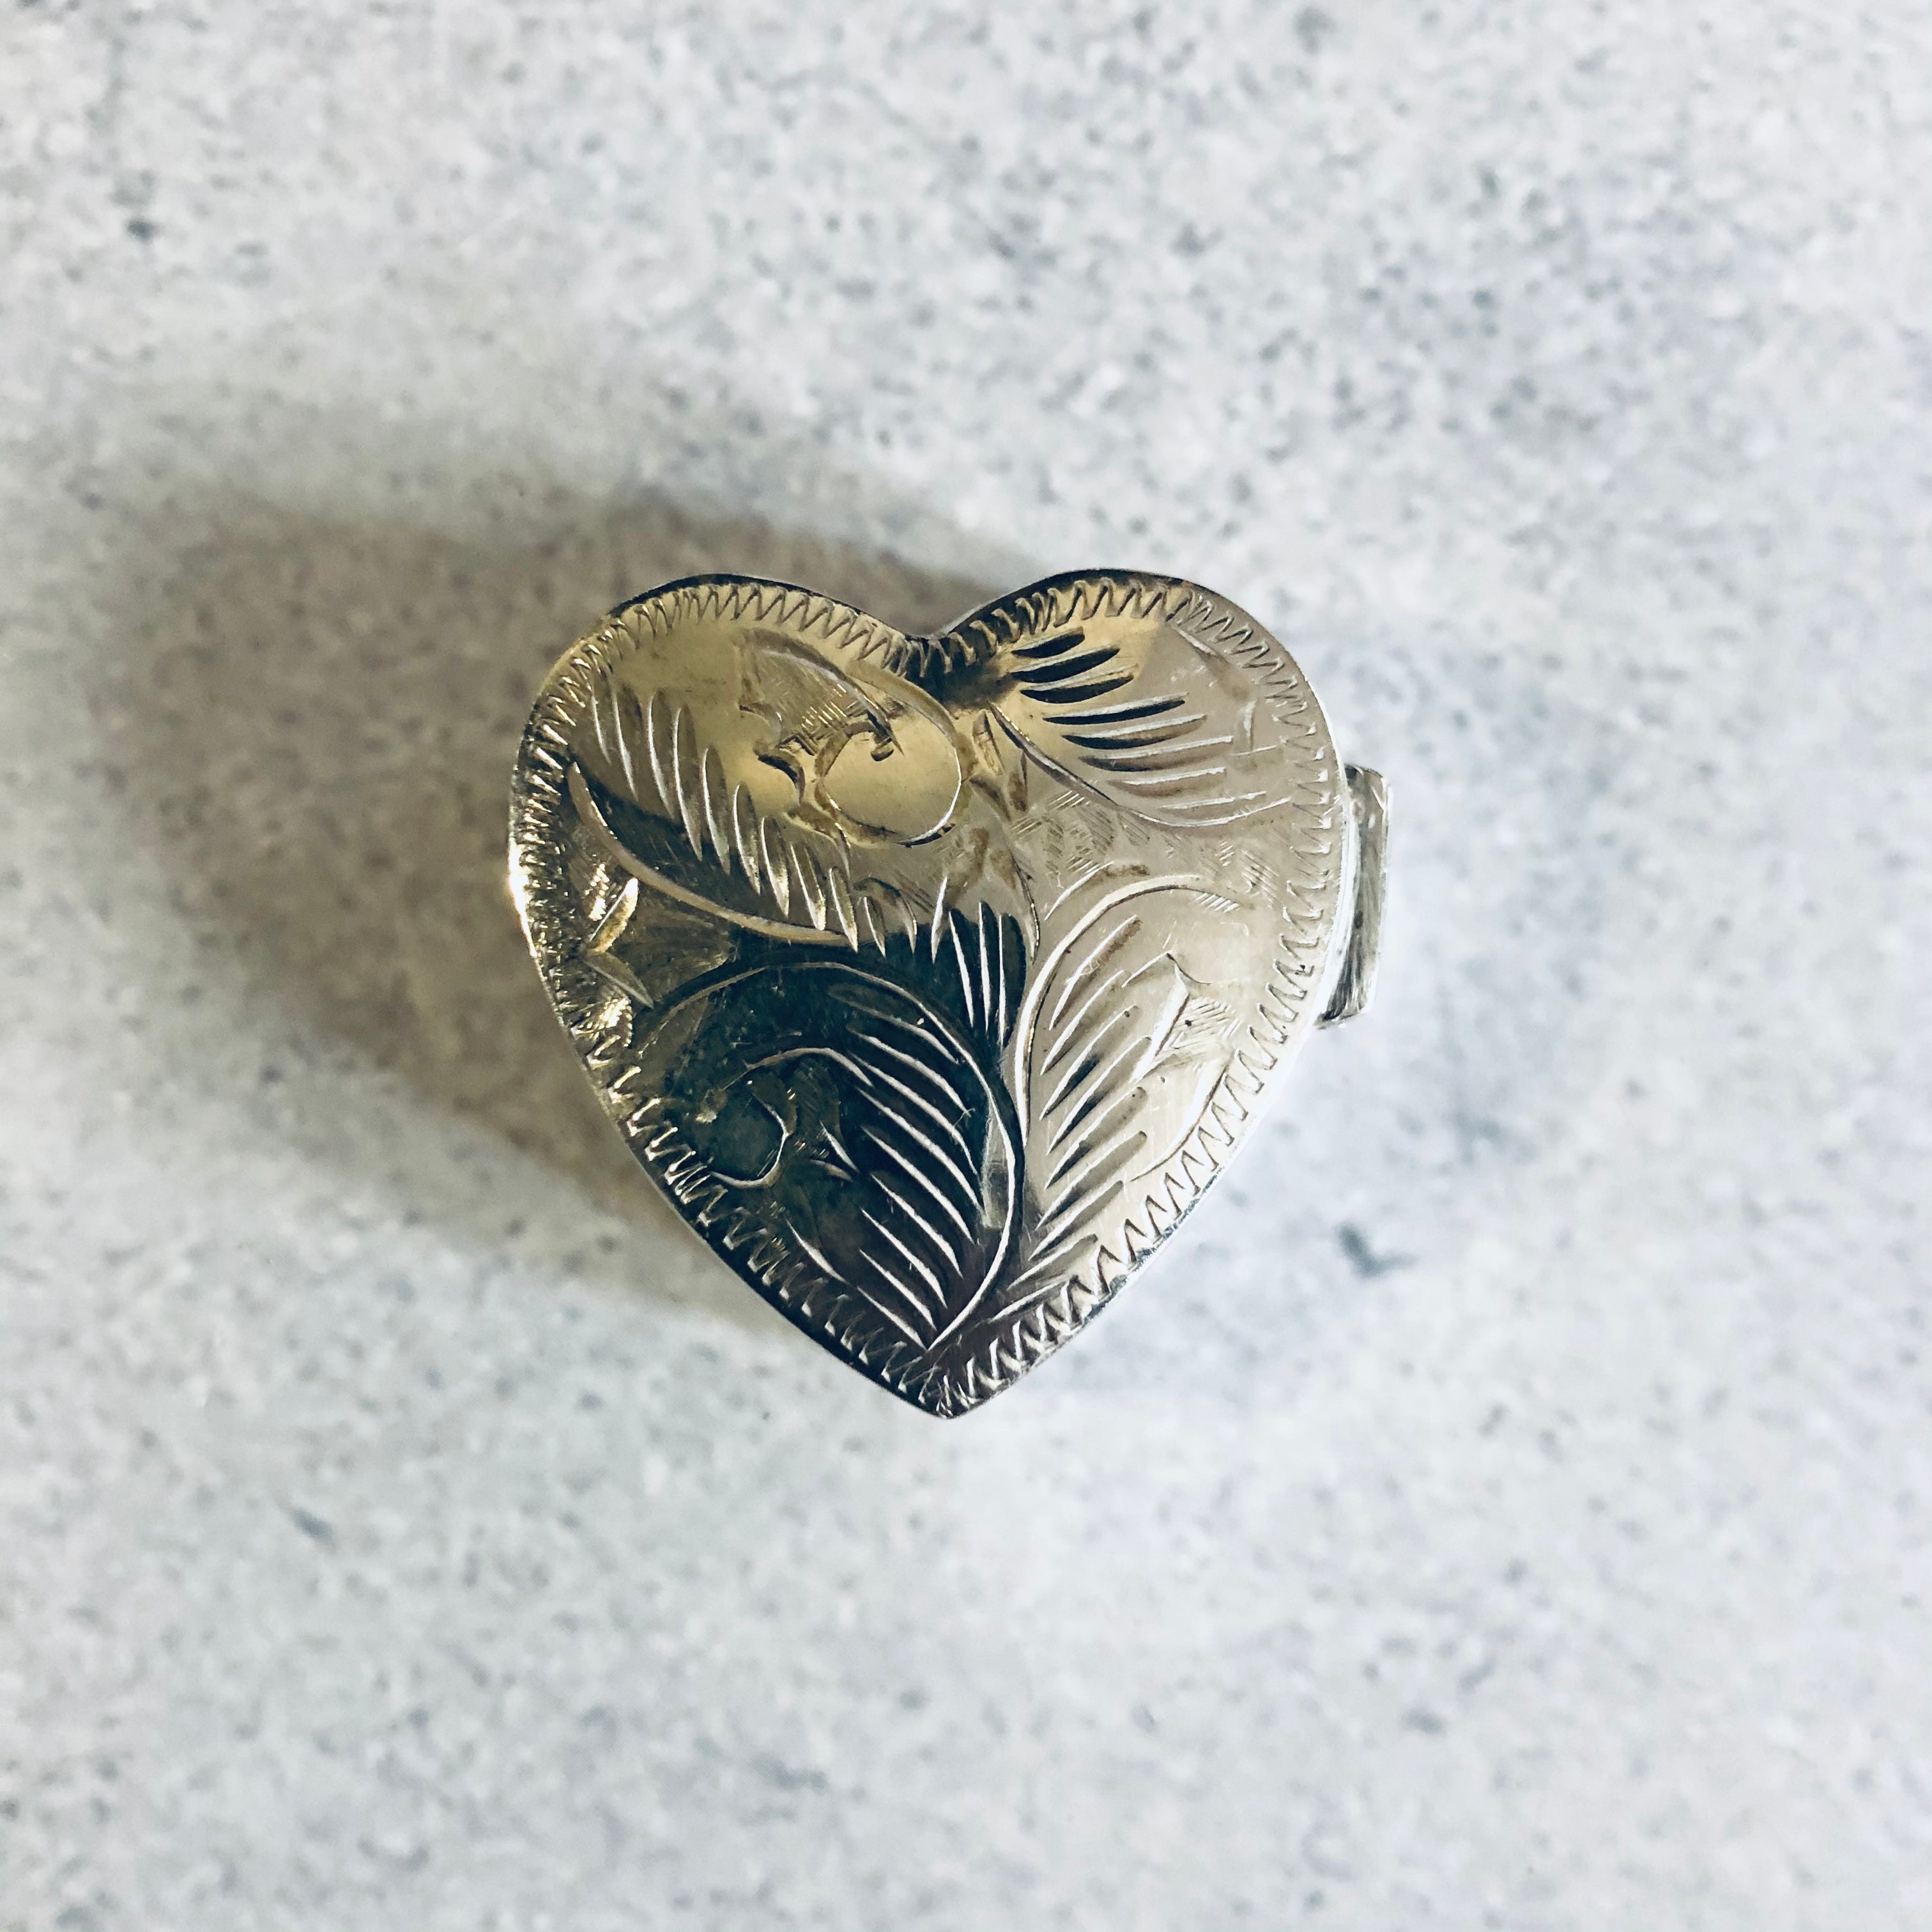 Vintage Sterling Silver Heart Shaped Dresser, Trinket Pill Box by Gucci